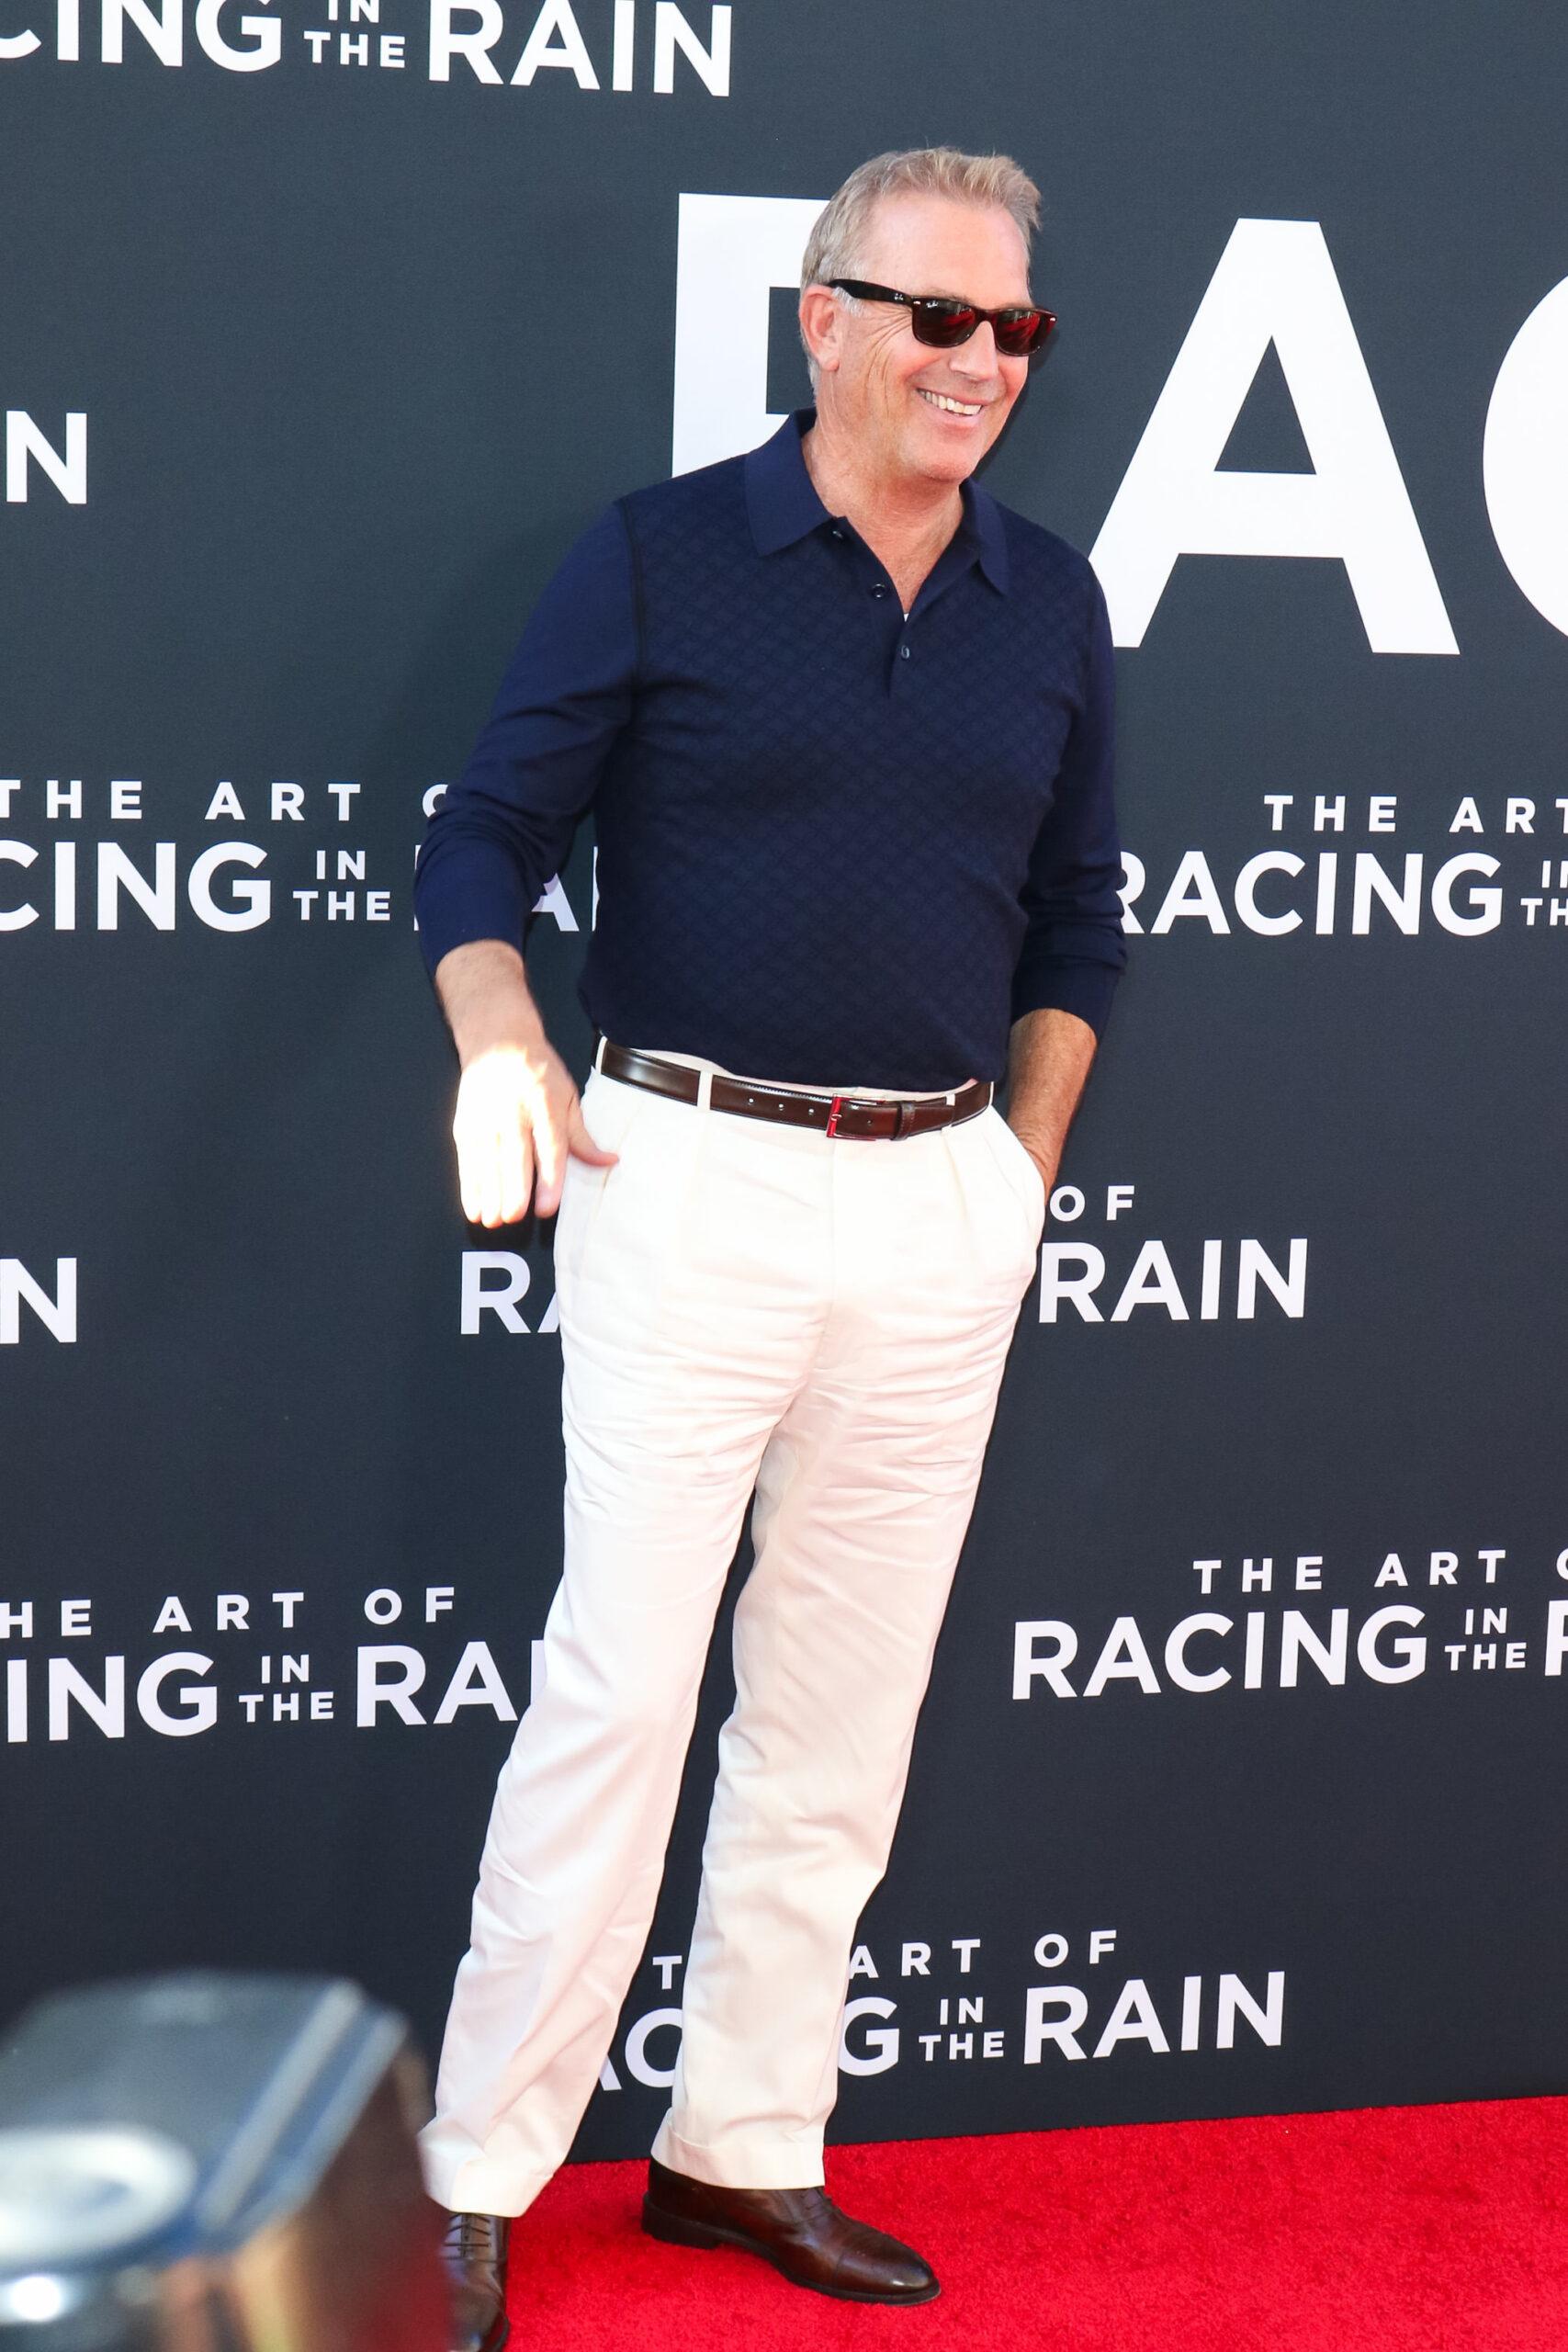 Premiere Of 20th Century Fox's 'The Art of Racing In The Rain'